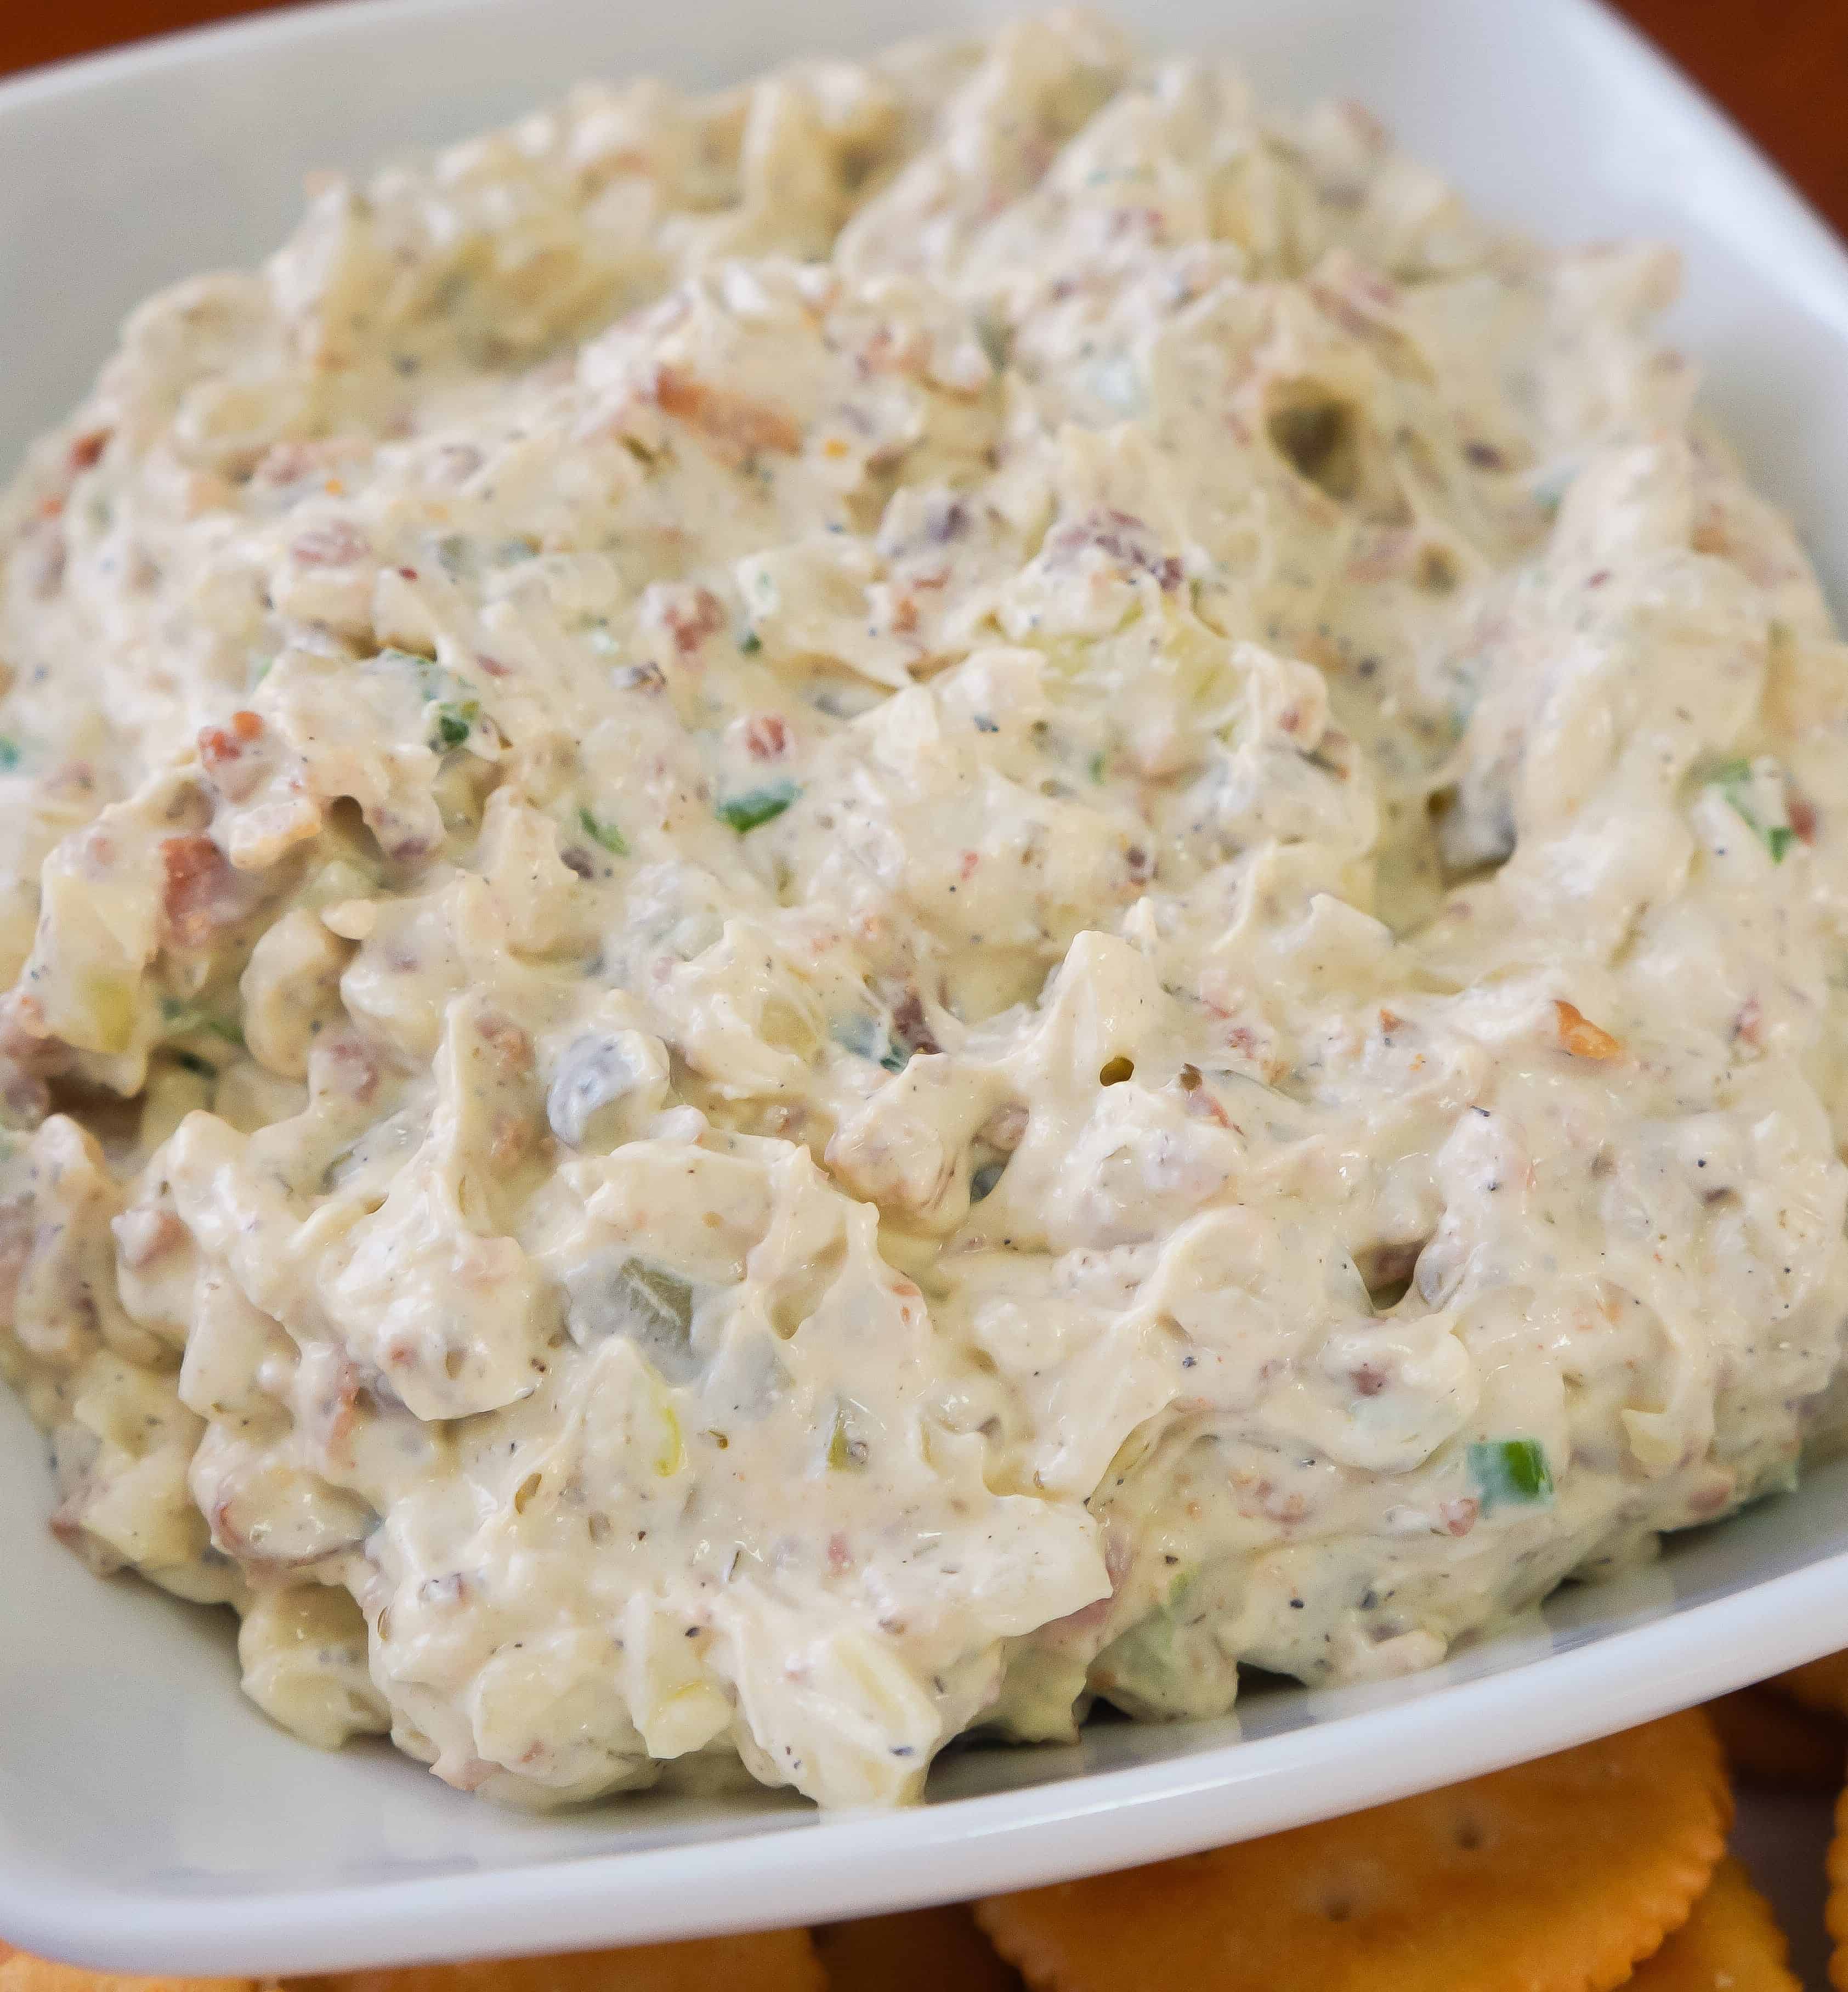 Bacon Onion Dip made with Herb and Garlic Cream Cheese